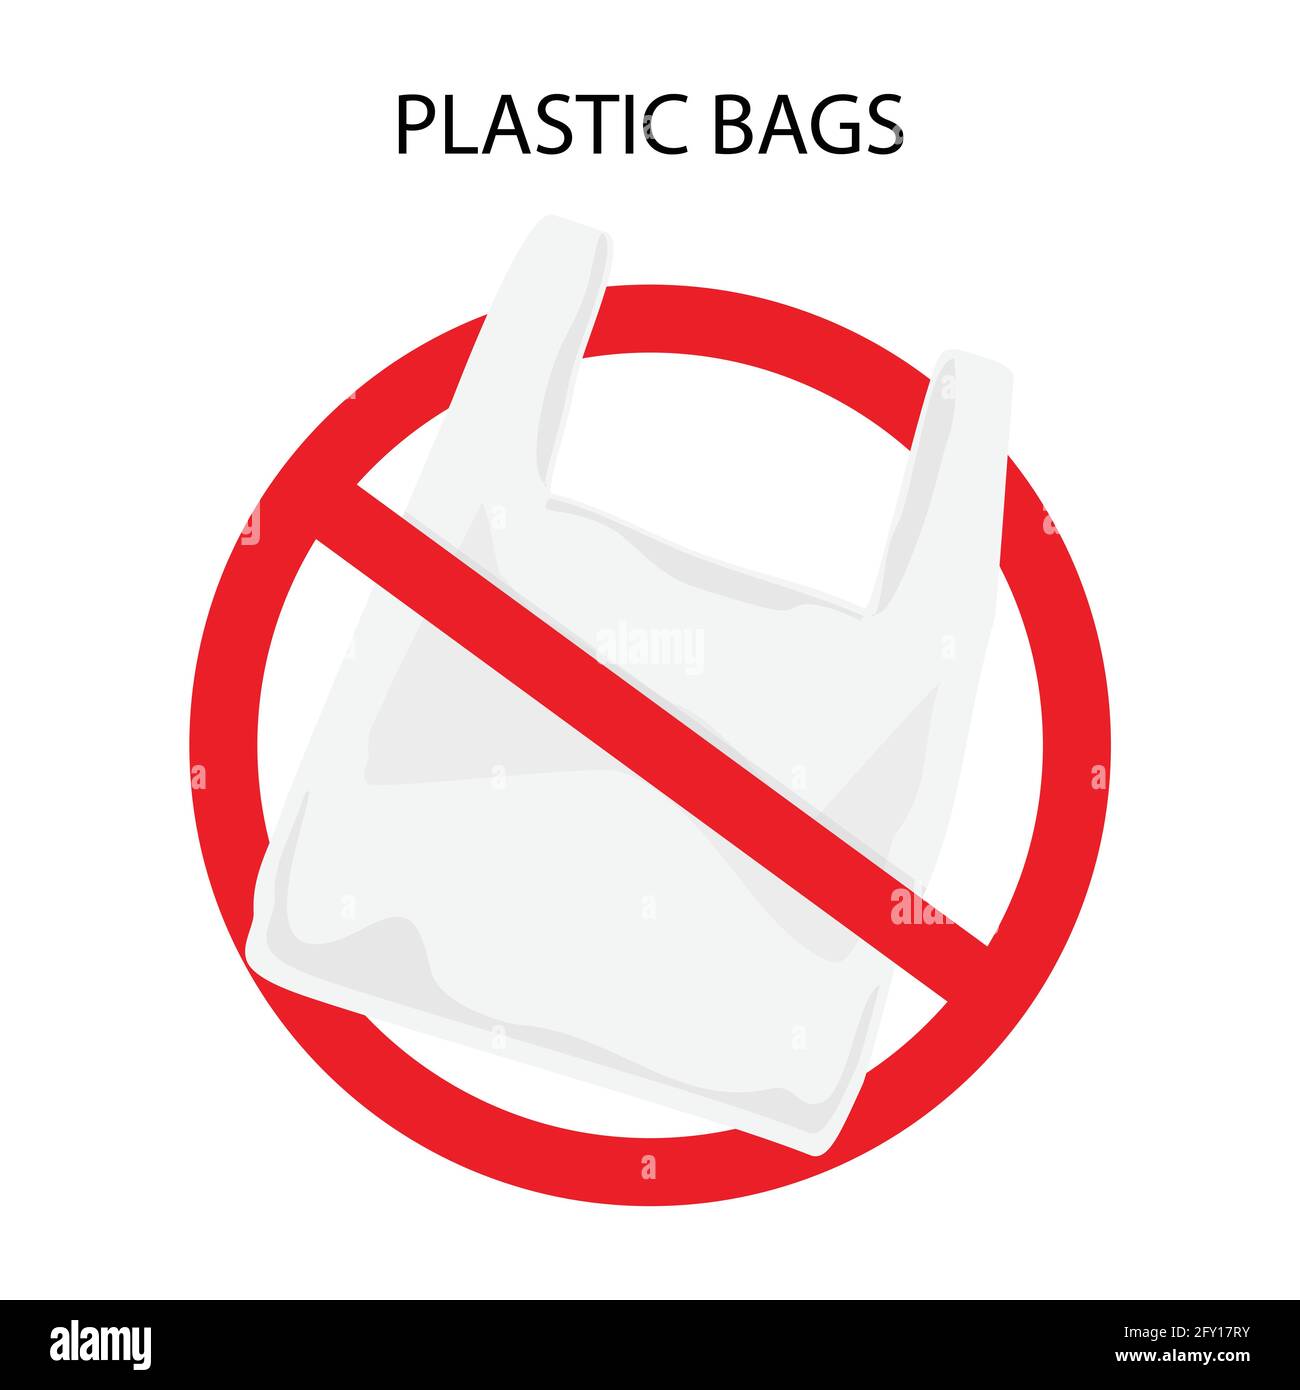 Say no to plastic bags poster. Disposable cellophane and polythene ...